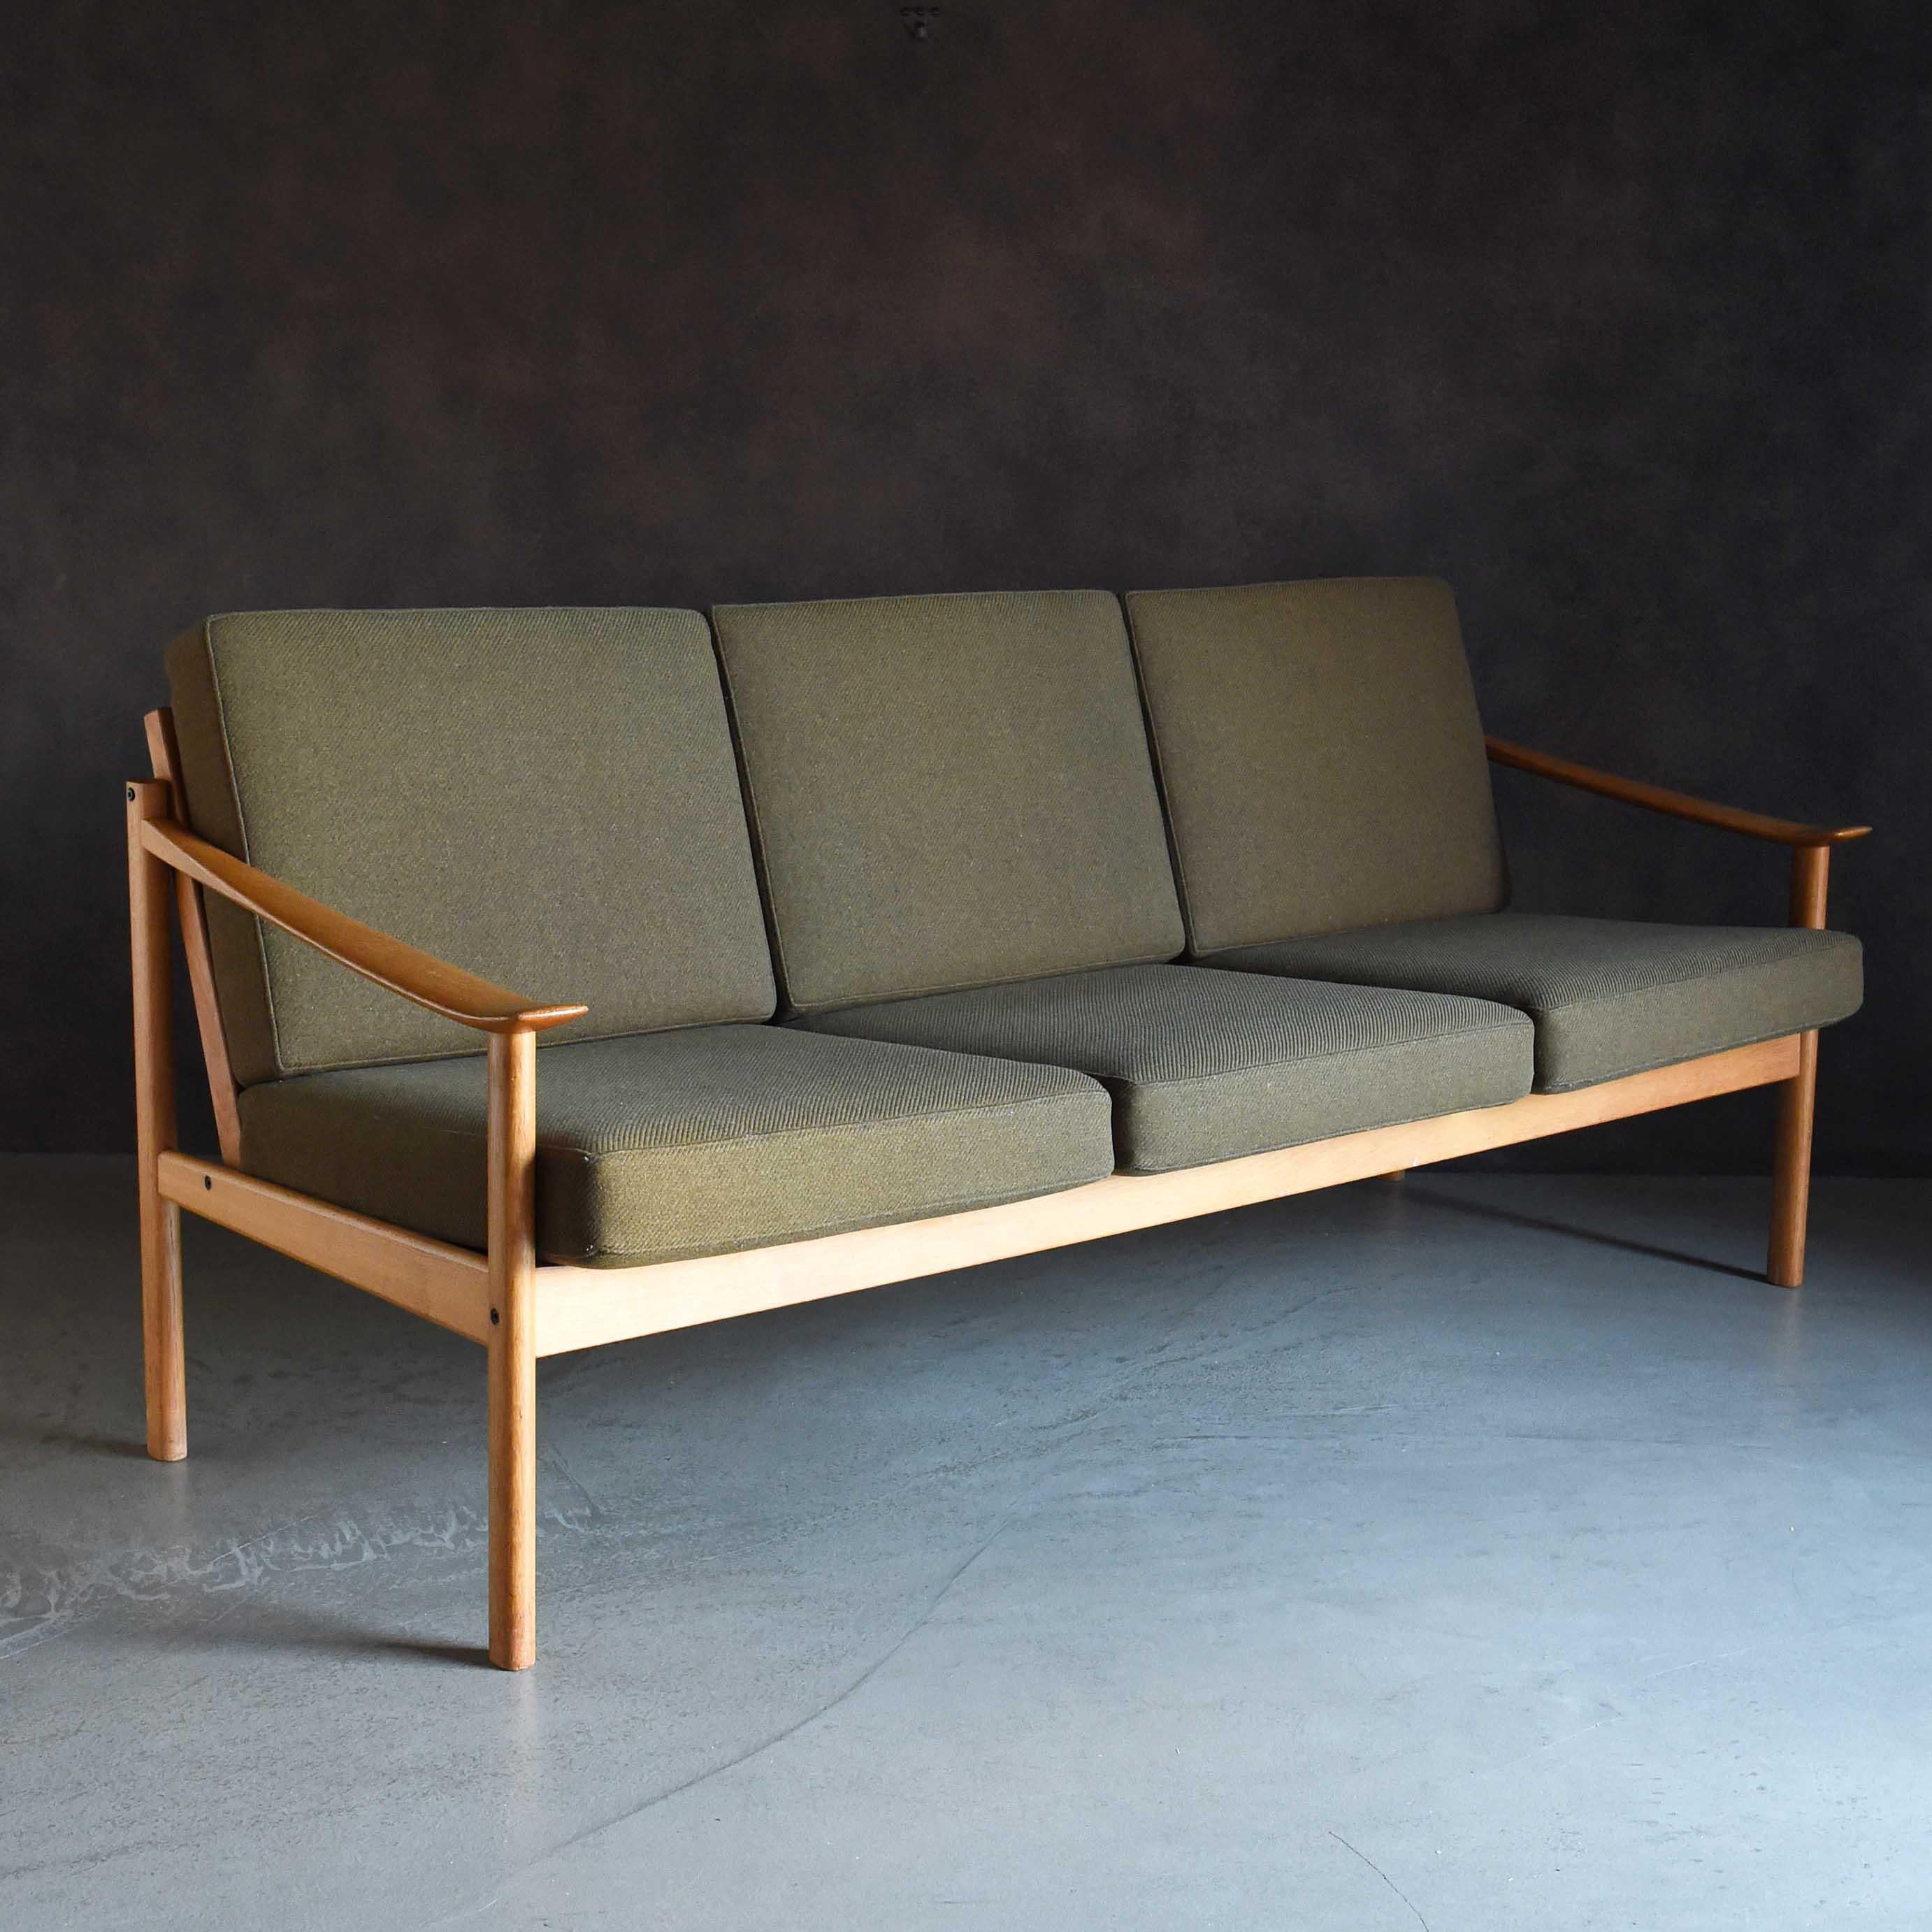 This is a 3-seater sofa designed by Danish designers Peter Hvidtand Orla Molgaard Nielsen, featuring a beautiful curved armrest. The overall design is clean and the seat is spacious and comfortable. The manufacturer, Soborg Mobler, is a